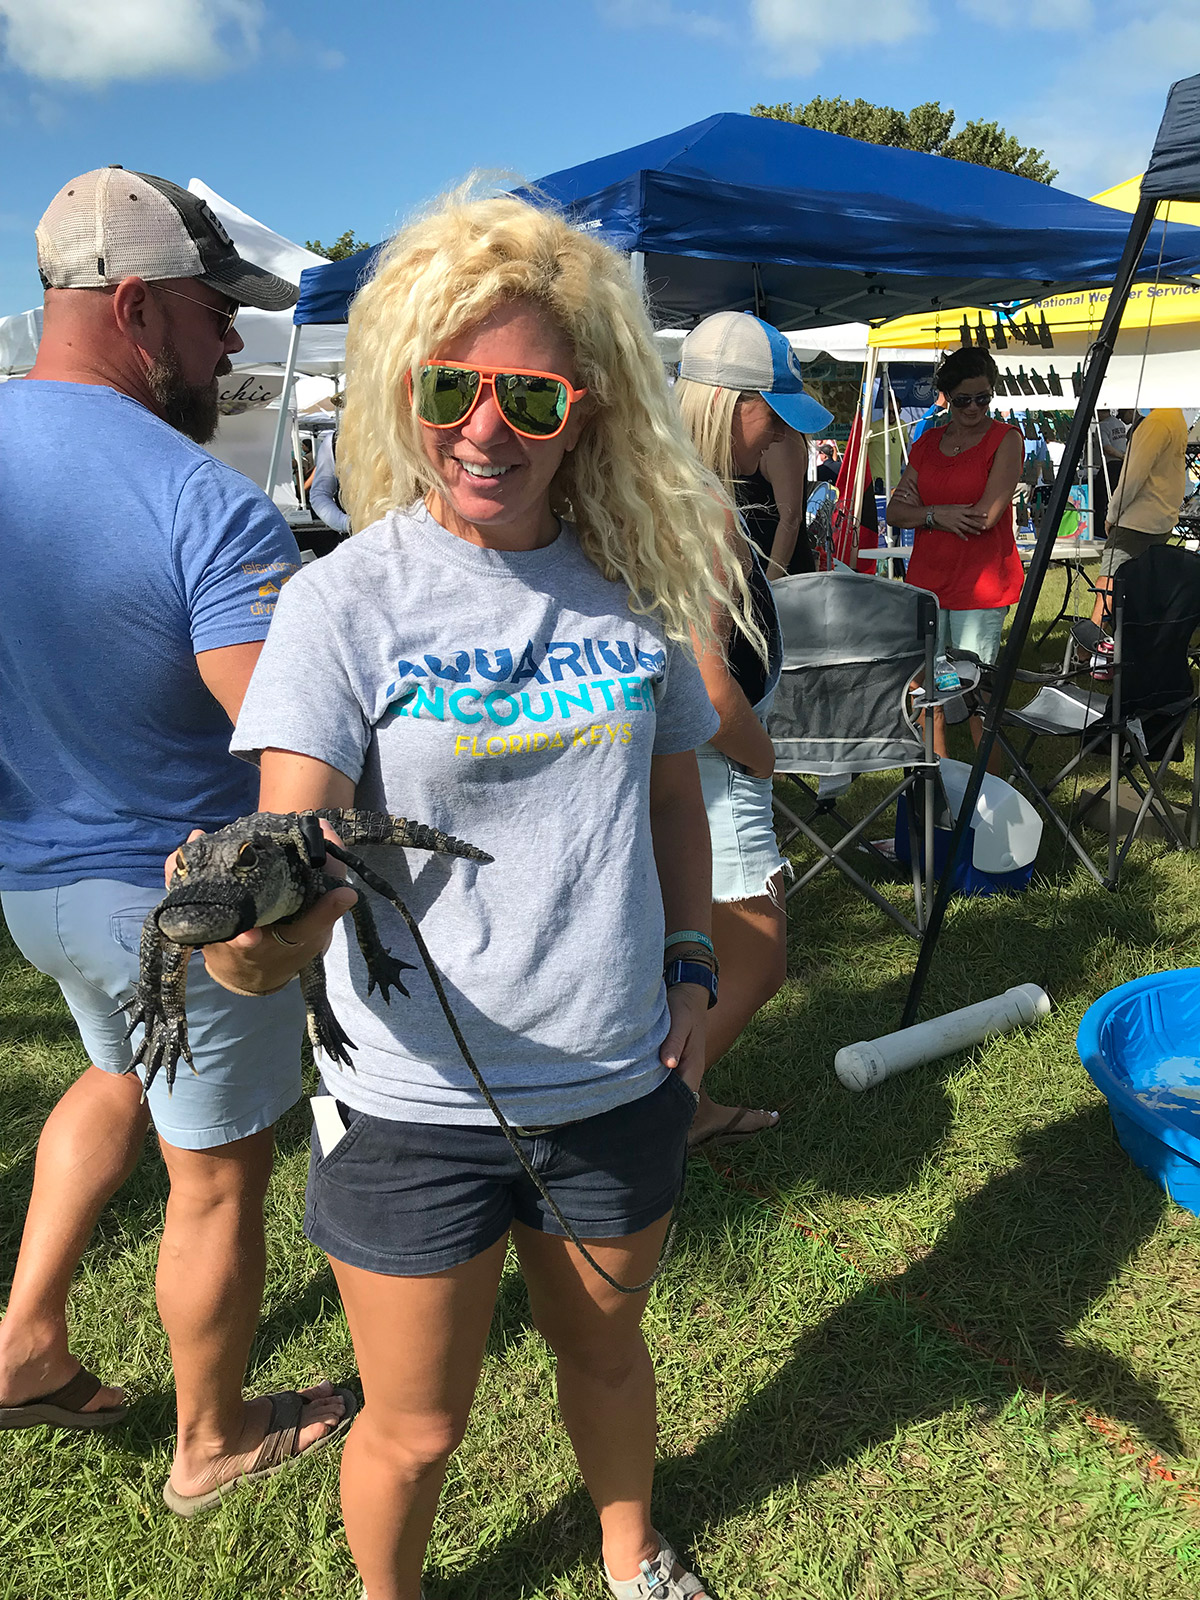 Kee Blight, marine biologist at Aquarium Encounters, holds a baby alligator during last year’s inaugural Mote Ocean Fest: A Community Celebration at Founders Park in Islamorada. FILE PHOTO